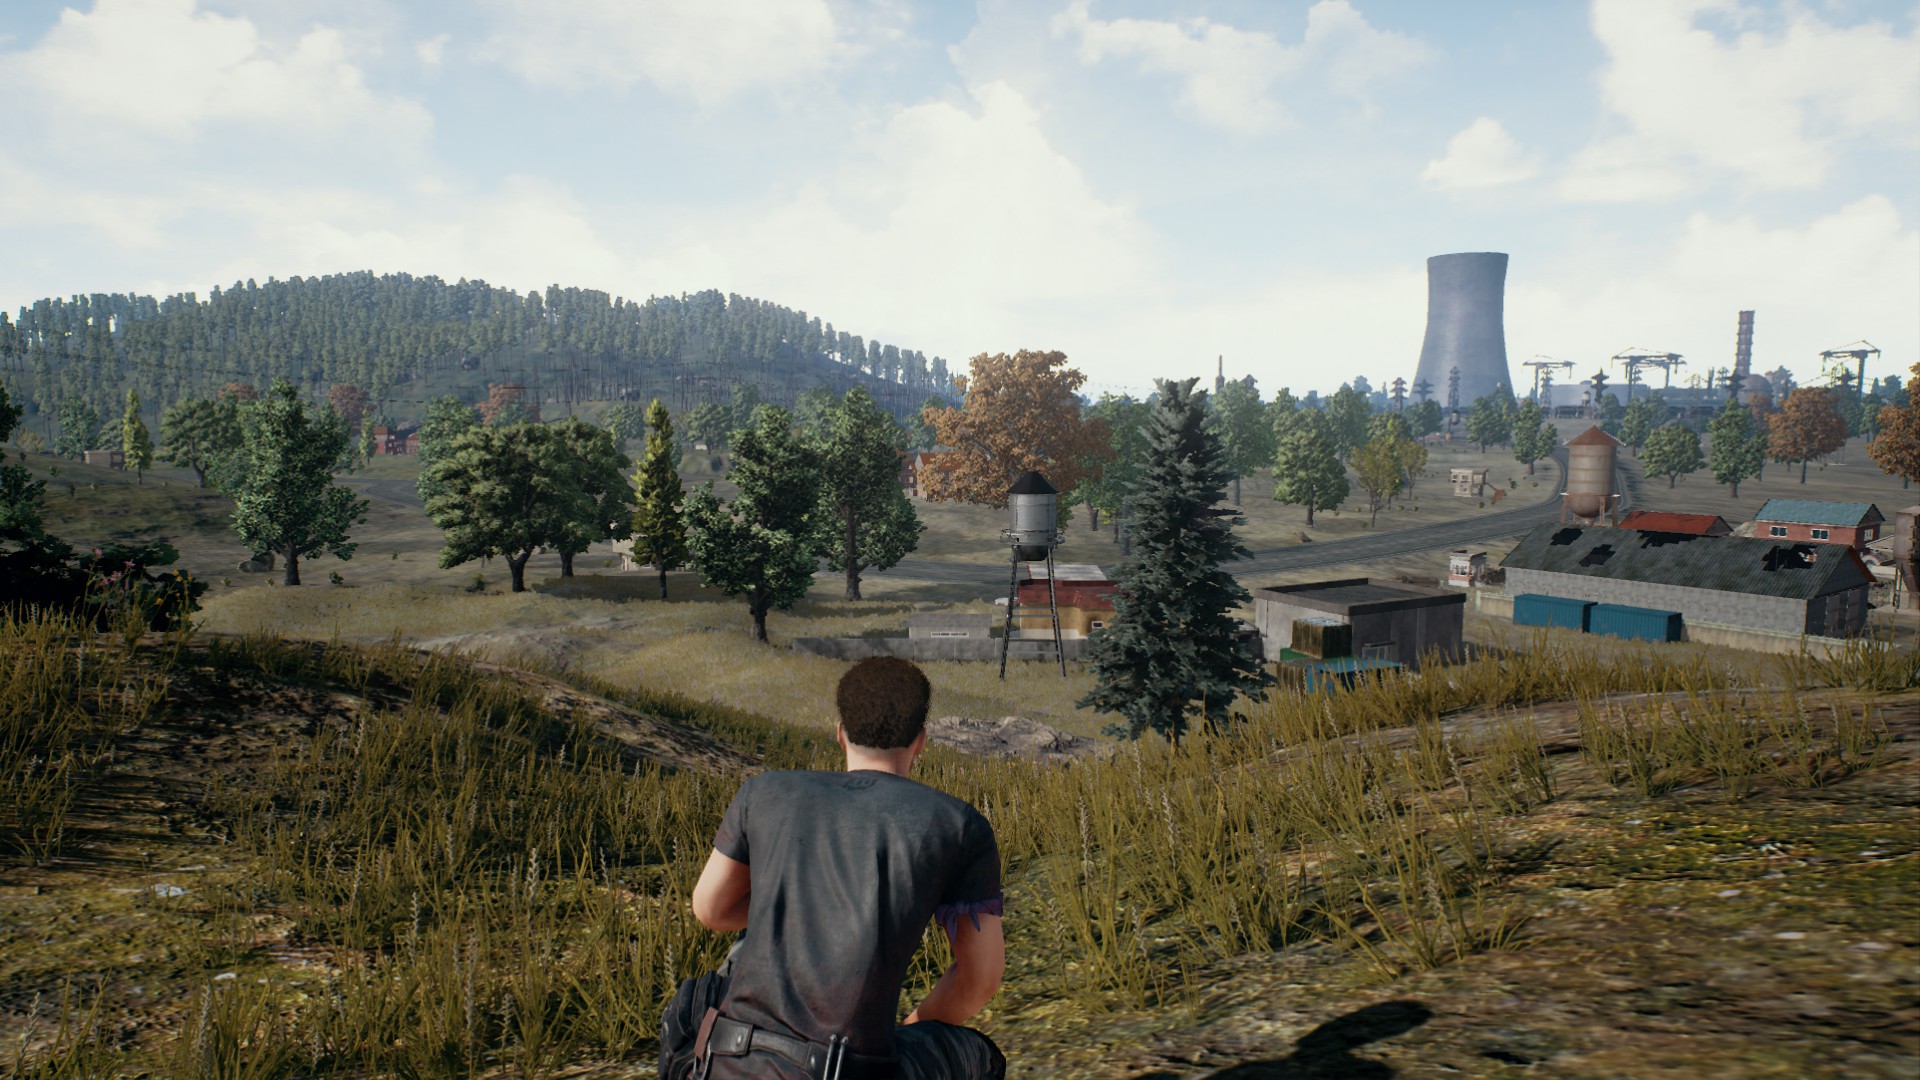 Download GFX Tool for PUBG on PC with MEmu